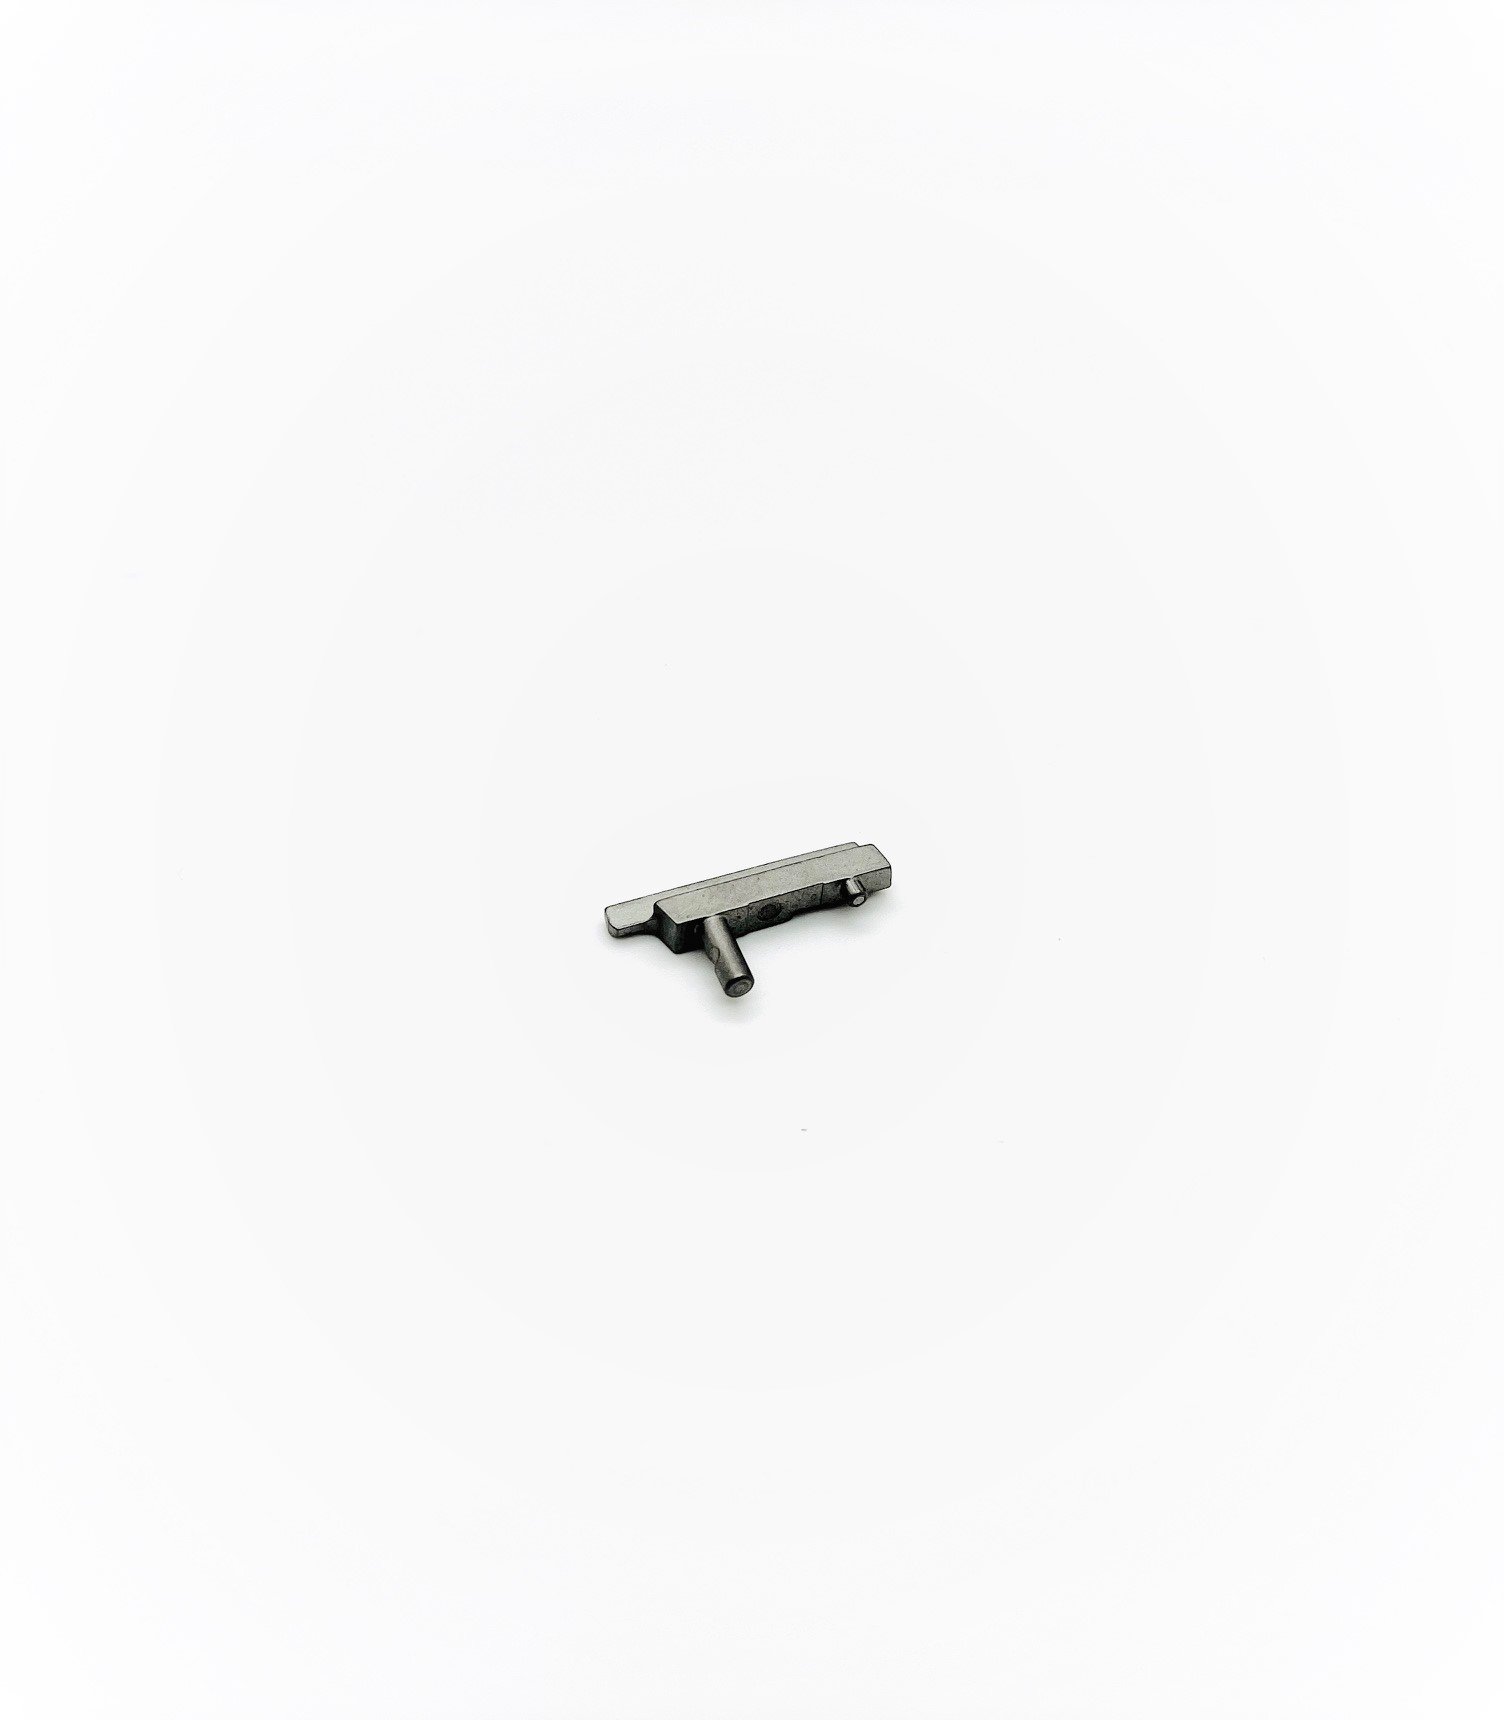 Ejector 9mm/40S&W Stainless steel